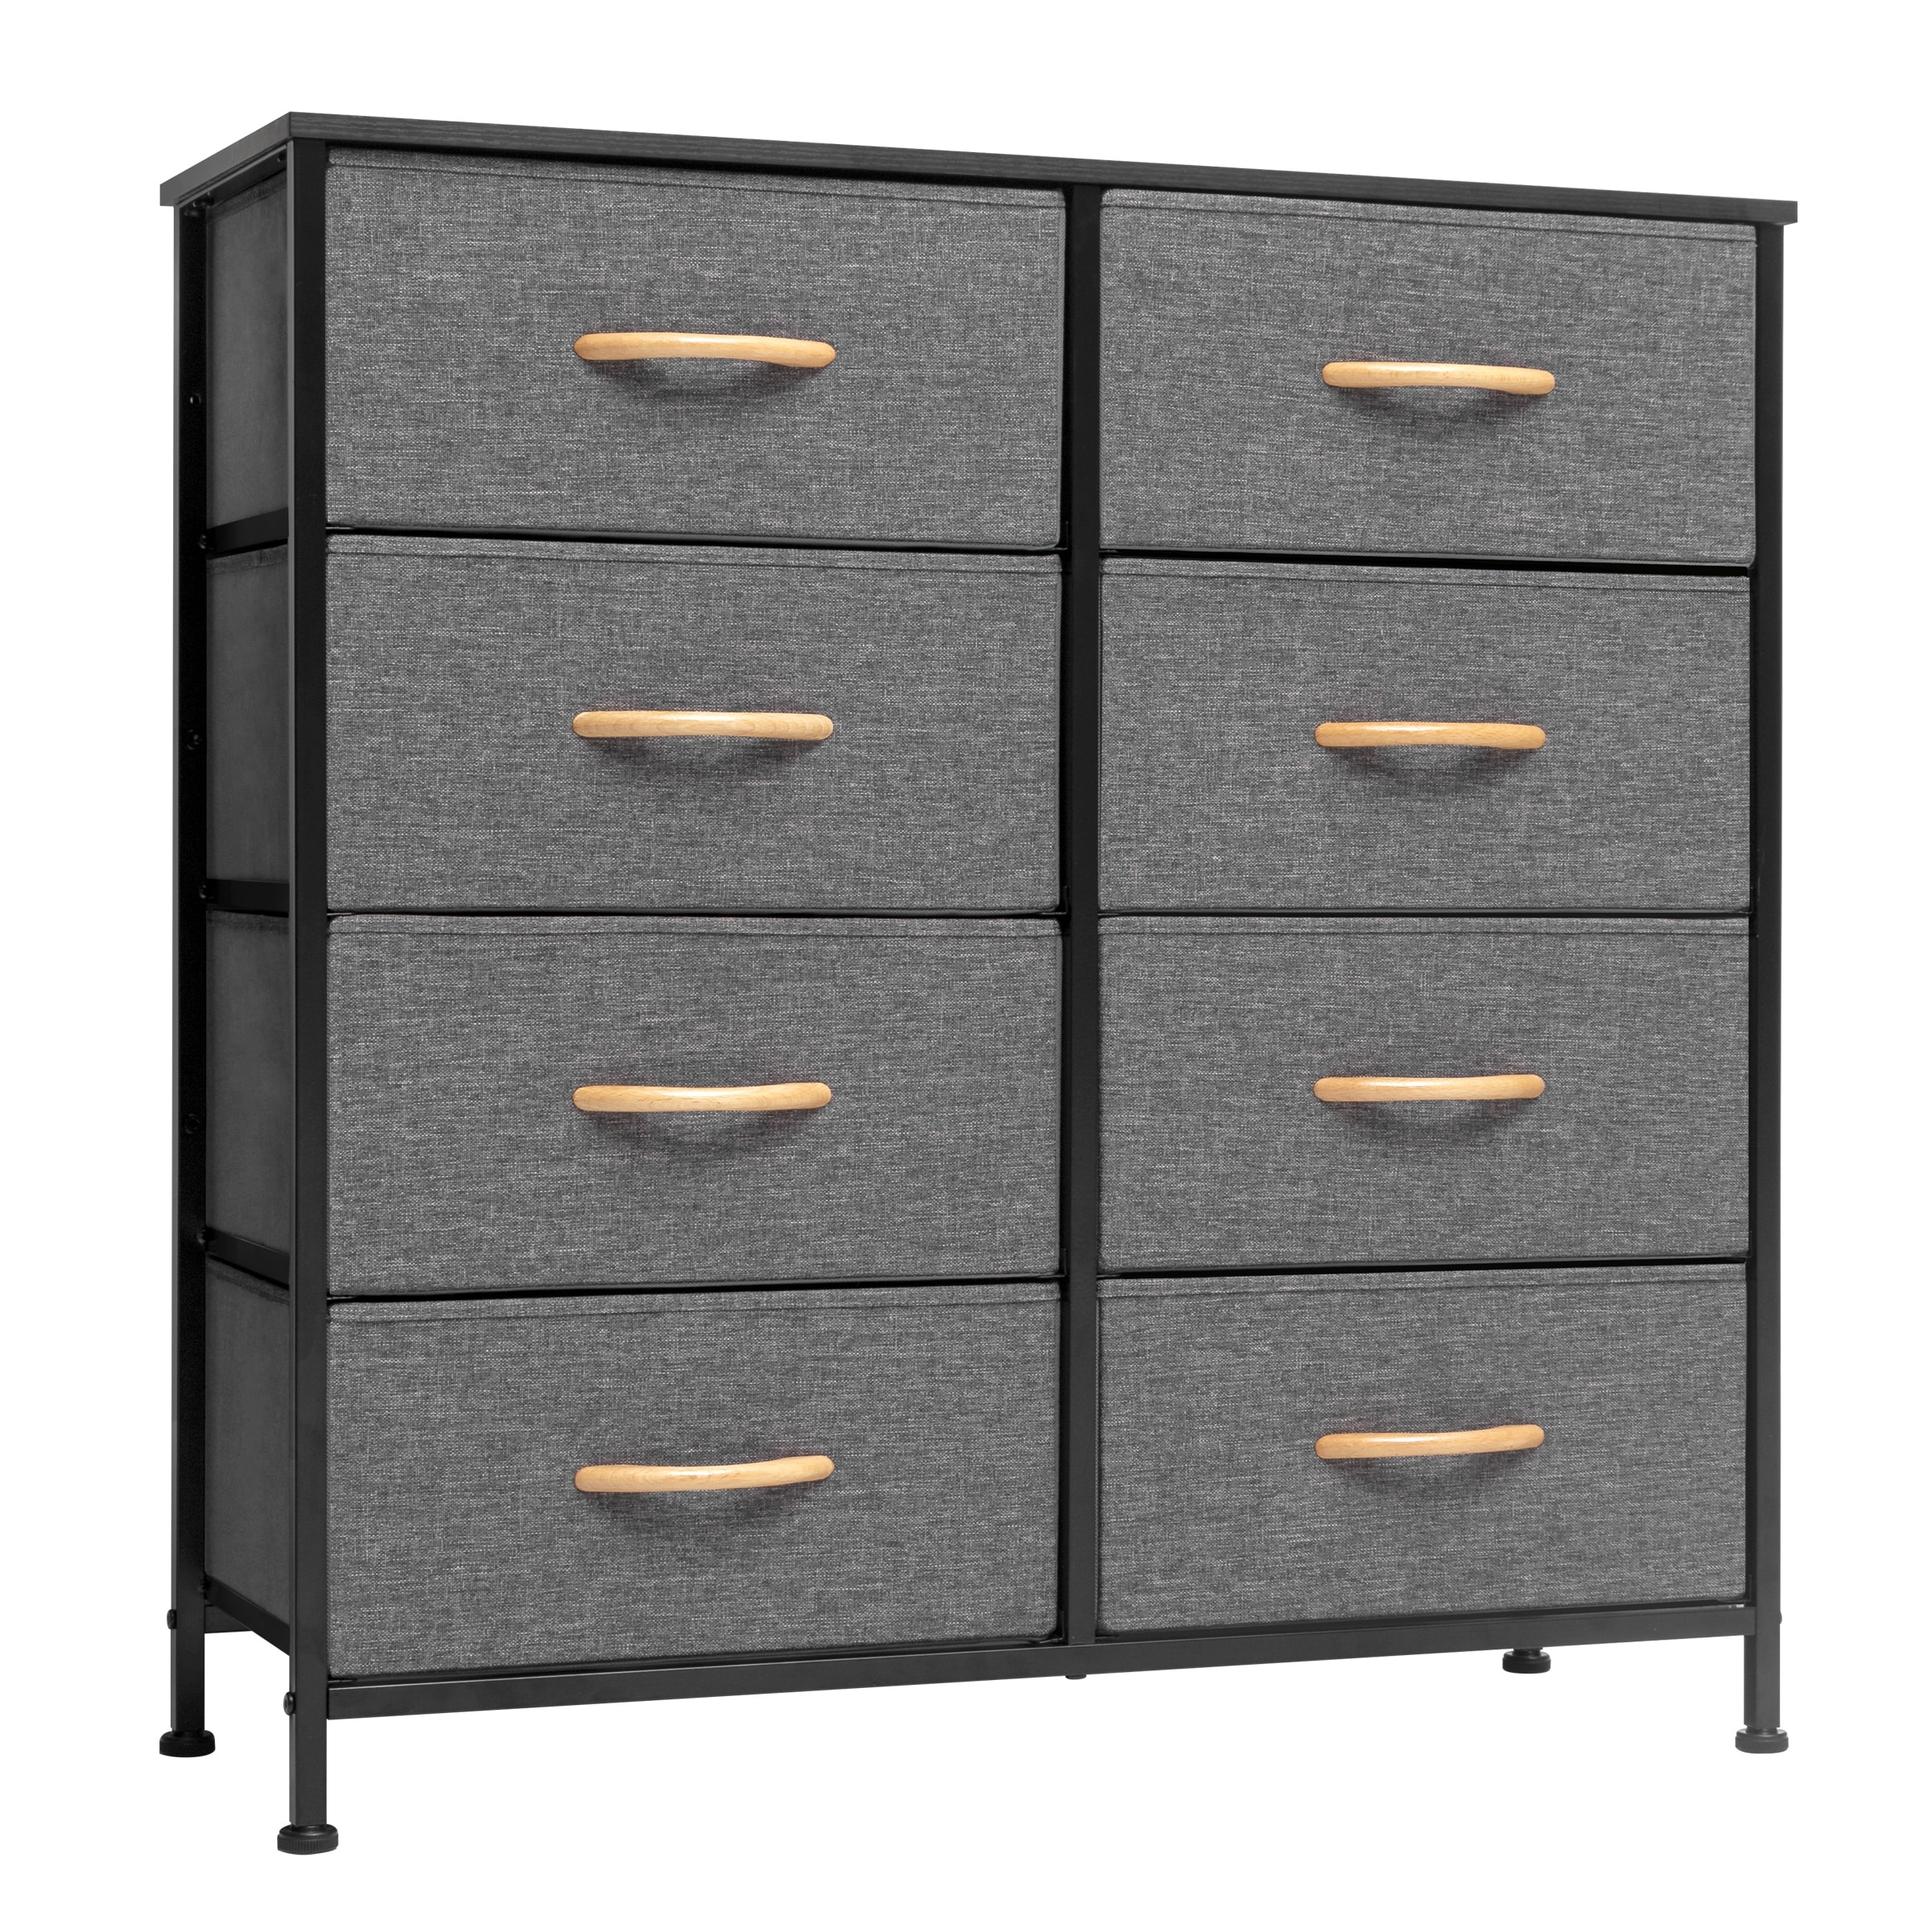 https://ak1.ostkcdn.com/images/products/is/images/direct/71ca3d8eb97c6e20ddab42f28f36d62cf8f11095/8-Drawers-Vertical-Dresser-Storage-Tower-Organizer-Unit-for-Bedroom.jpg